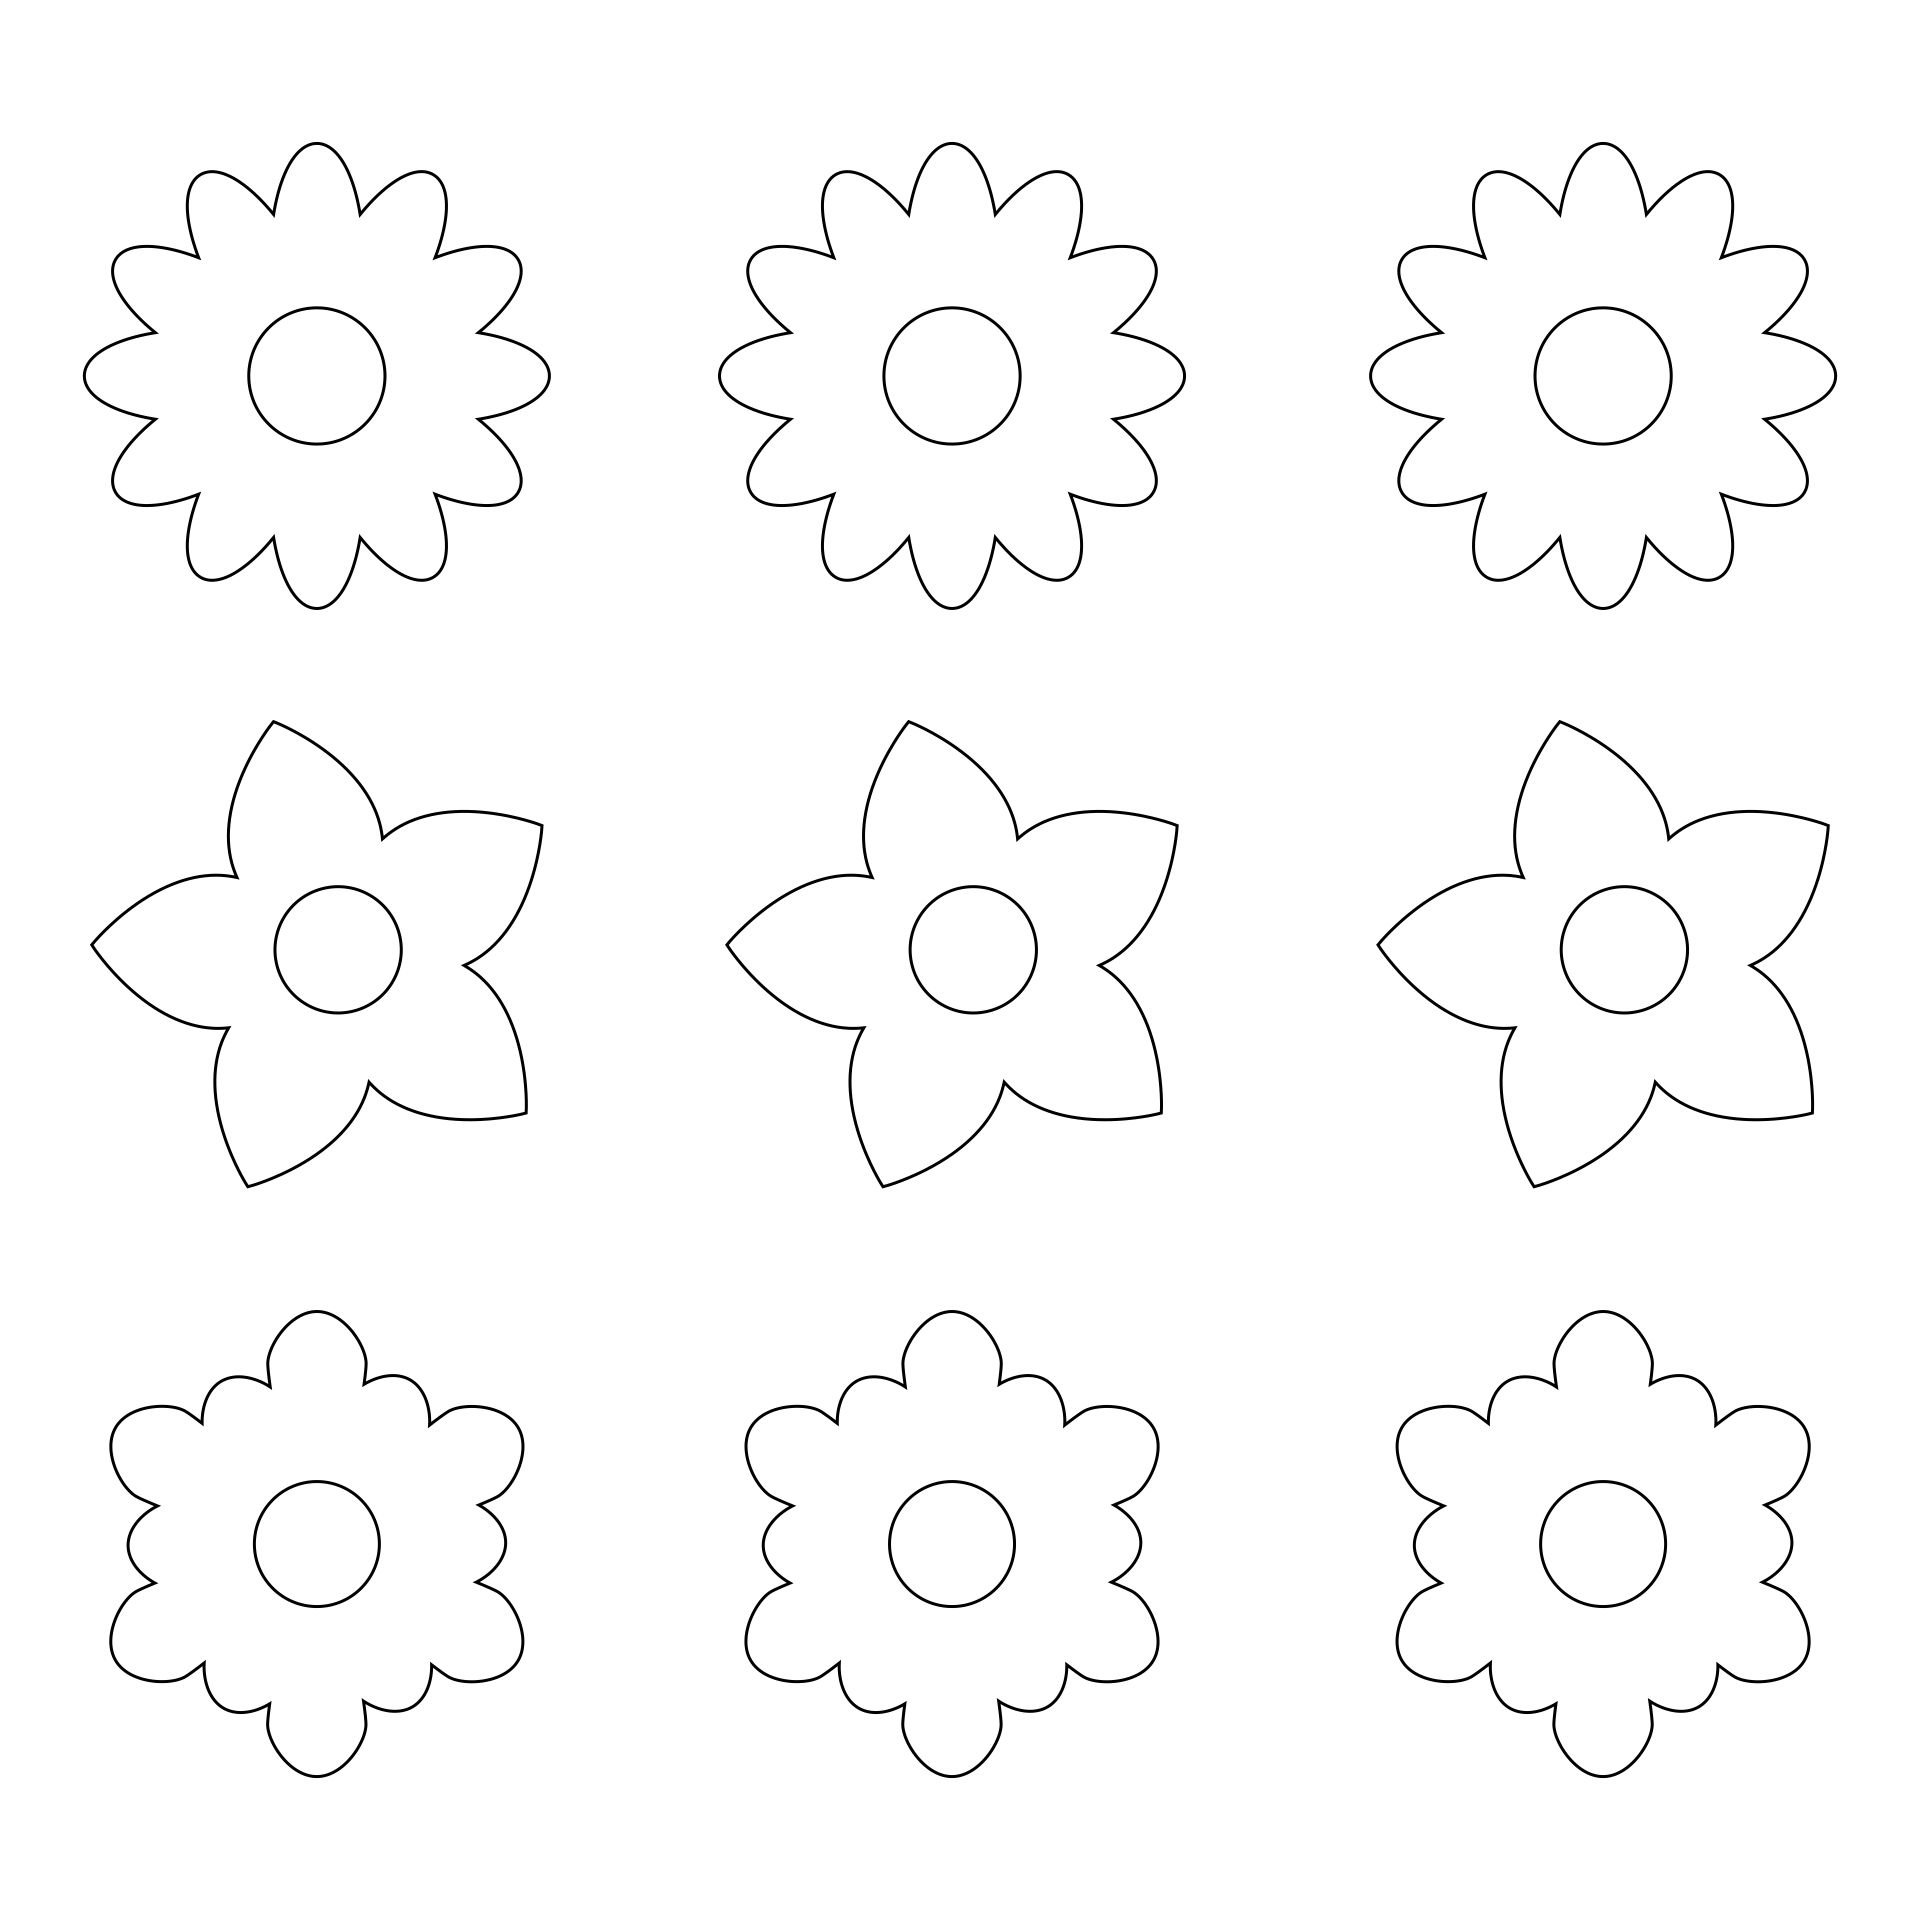 6-best-images-of-paper-flower-templates-printable-free-paper-flower-templates-printable